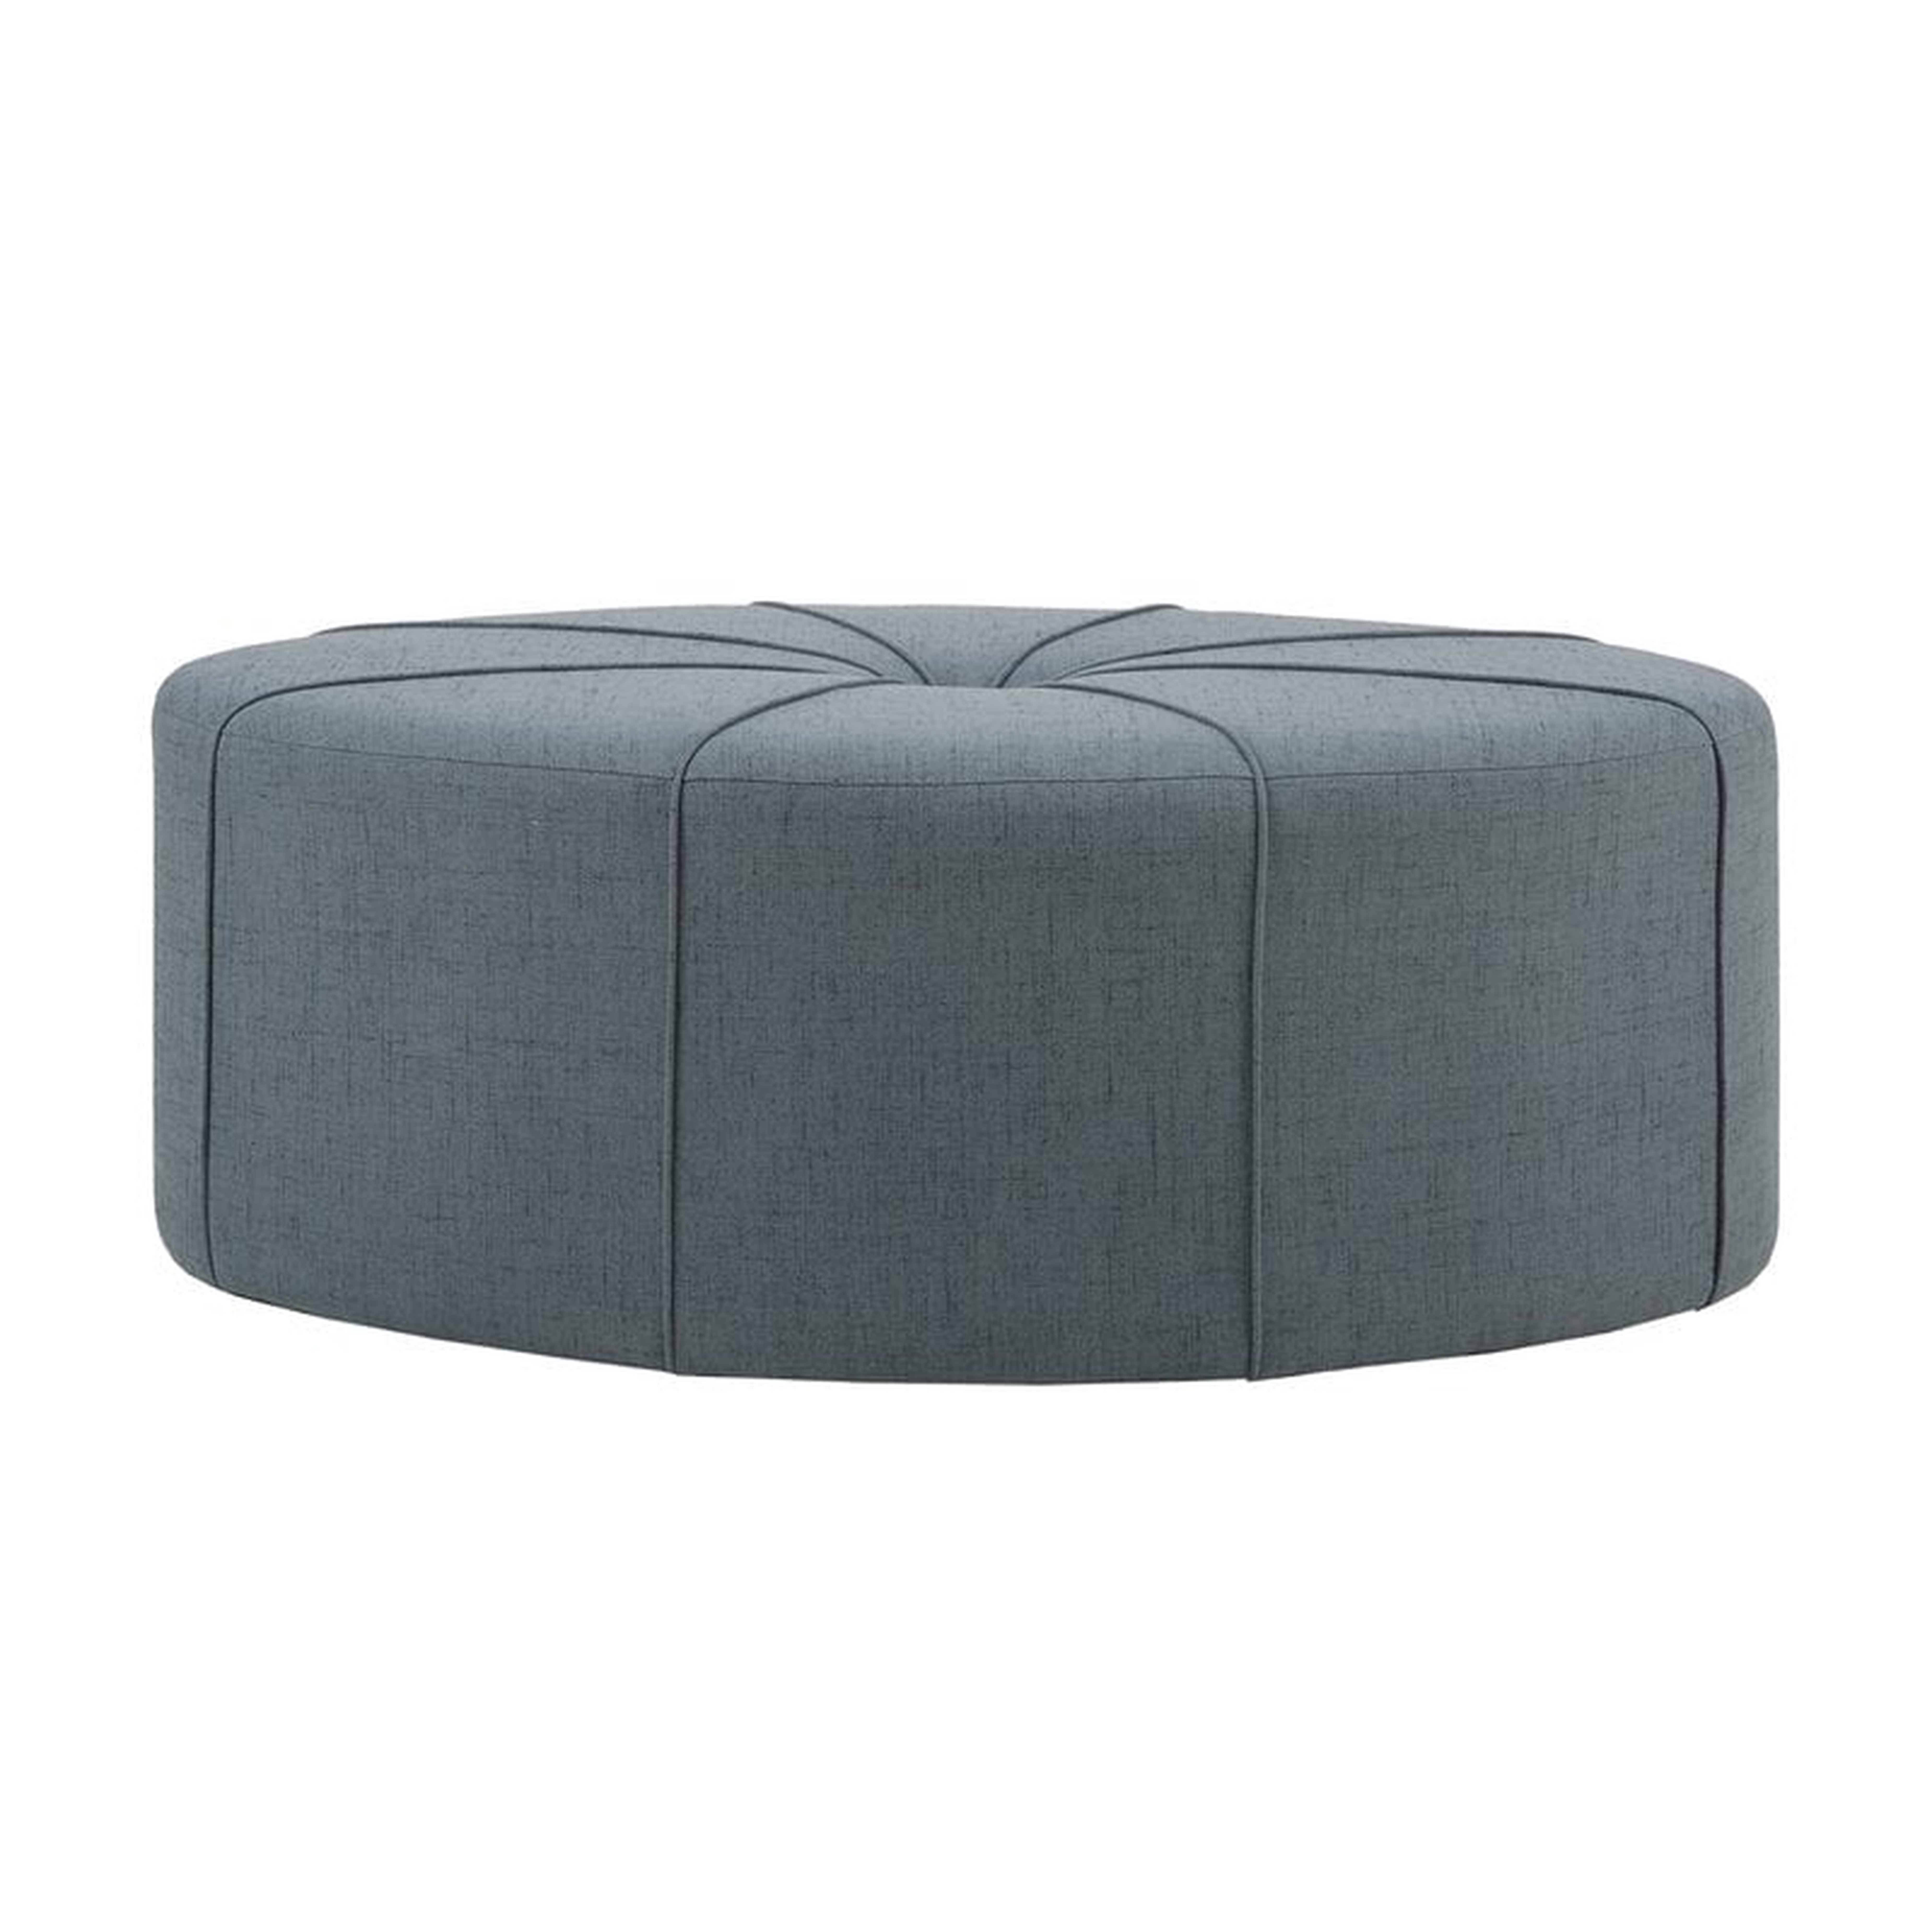 Christopher 48.5" Wide Tufted Oval Cocktail Ottoman - Wayfair